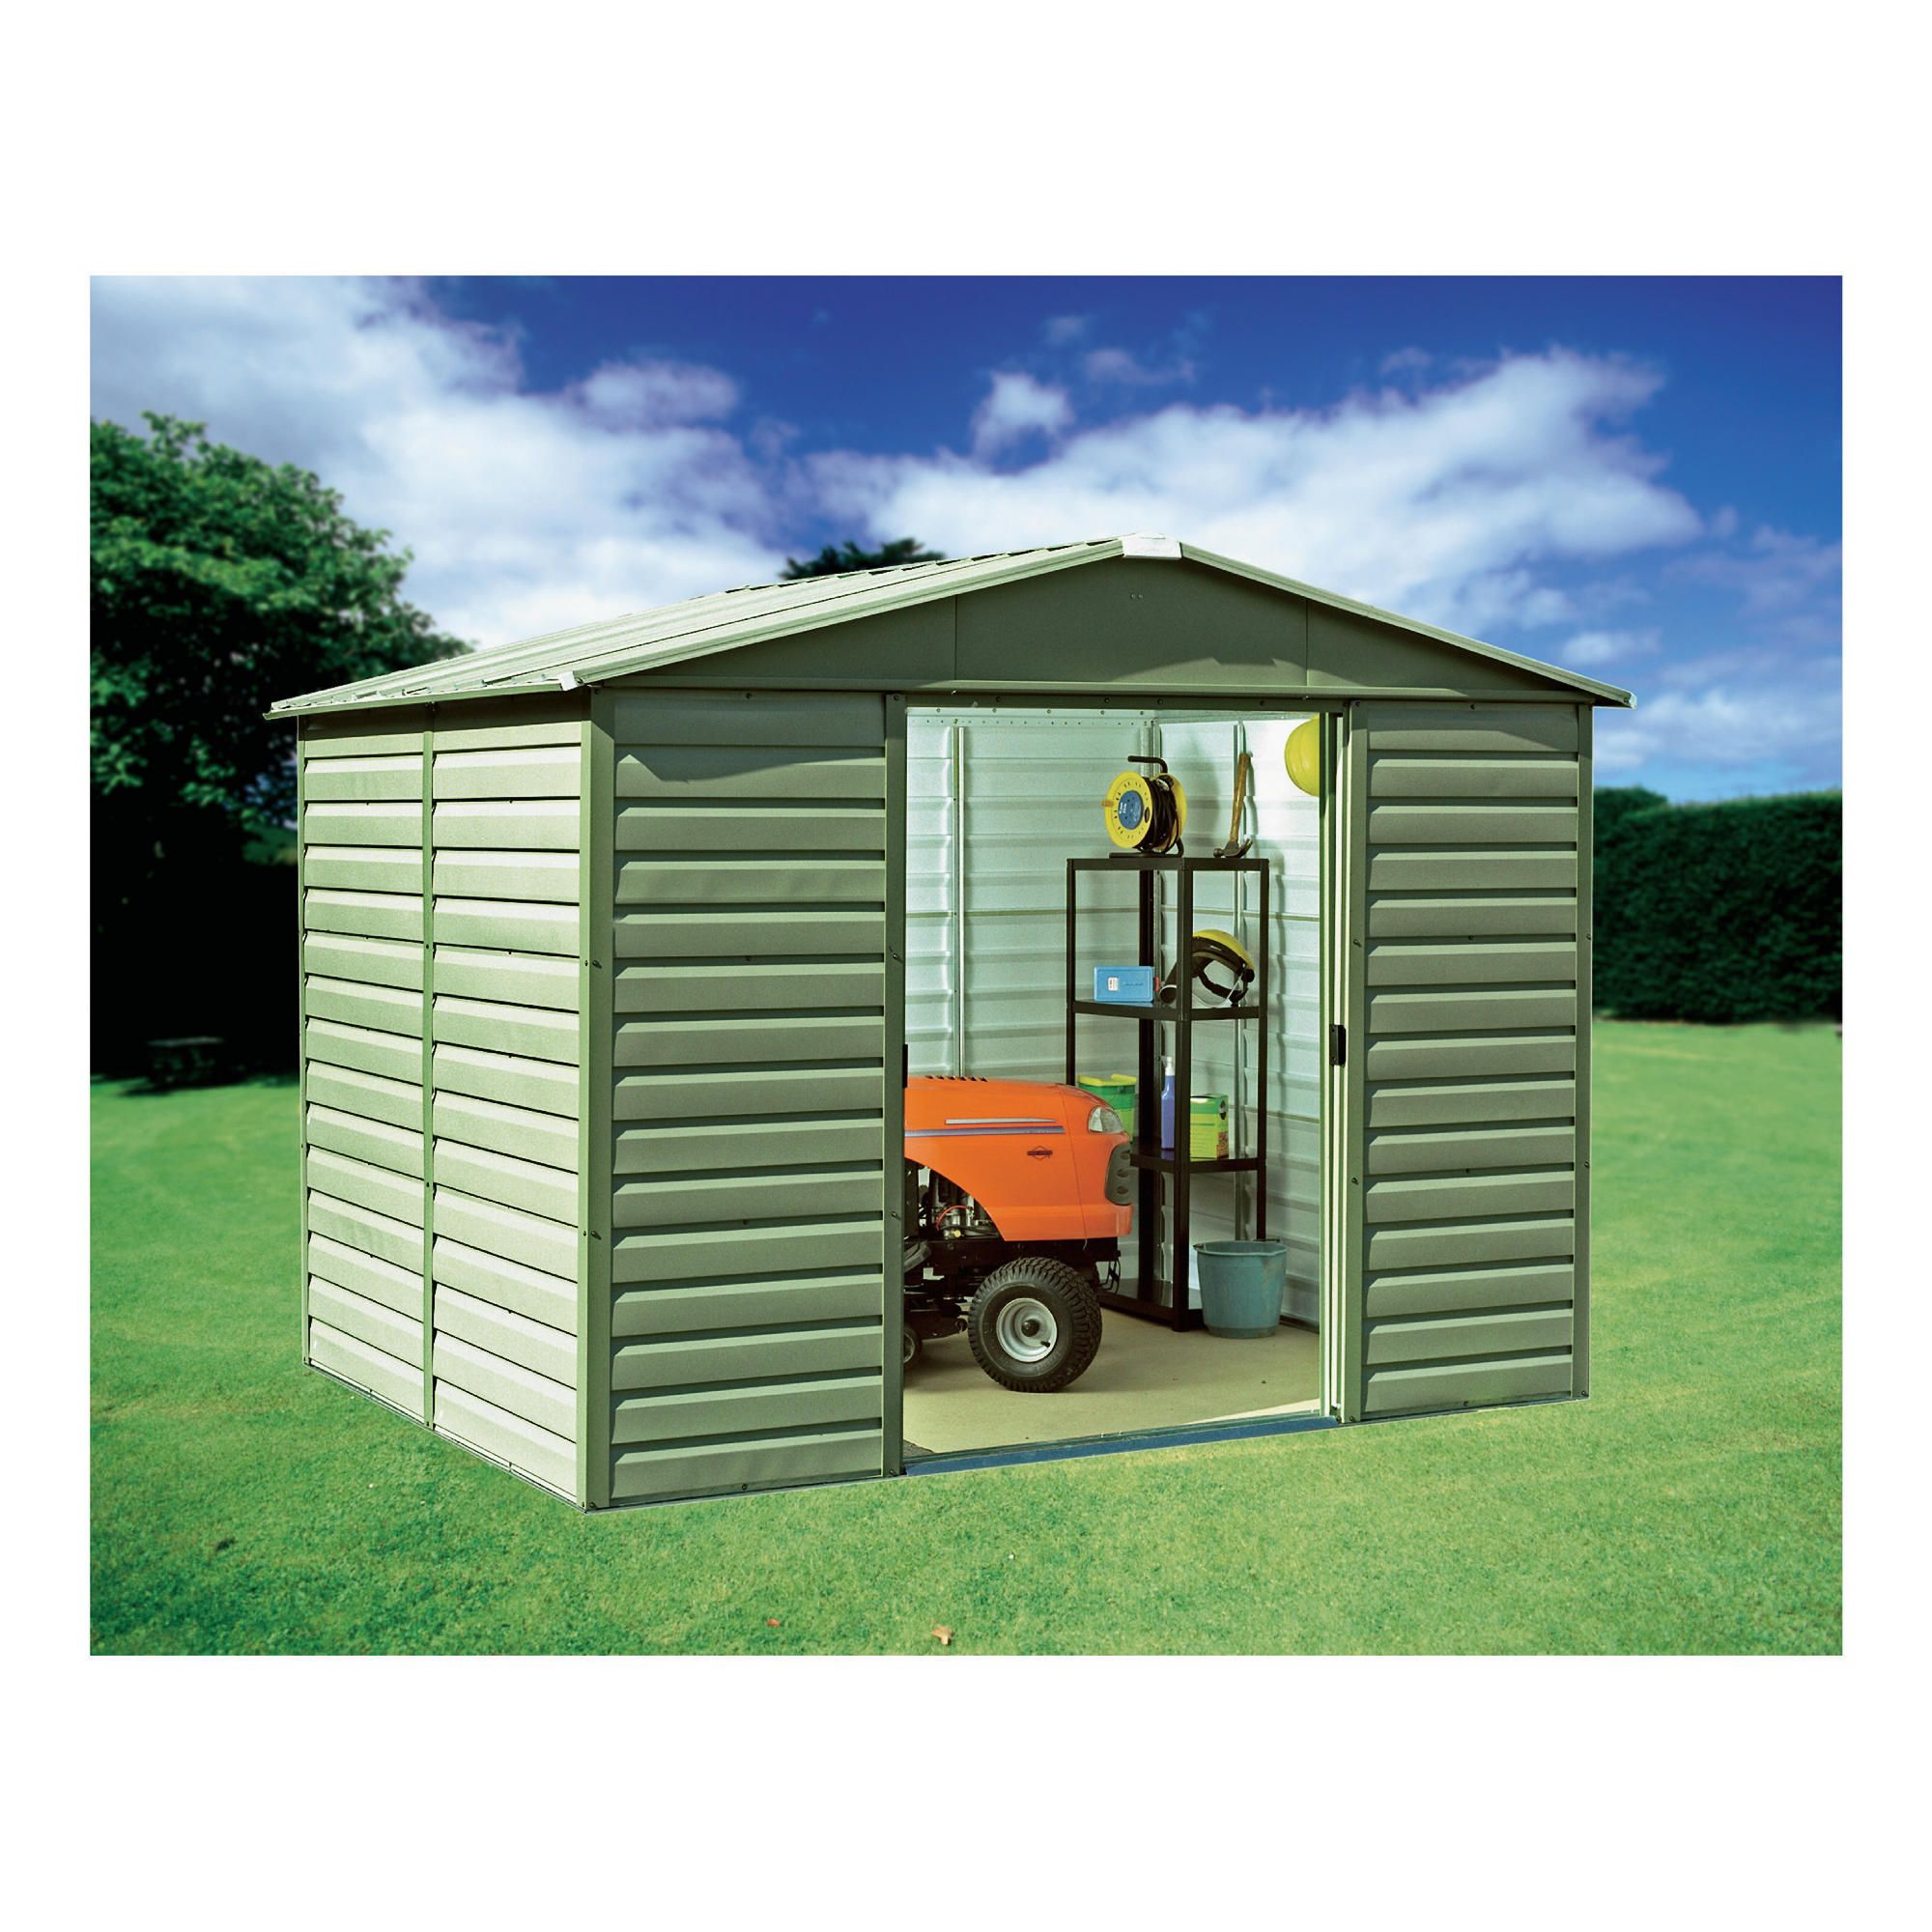 This Yardmaster 8x6 shiplap metal shed features a floor support frame